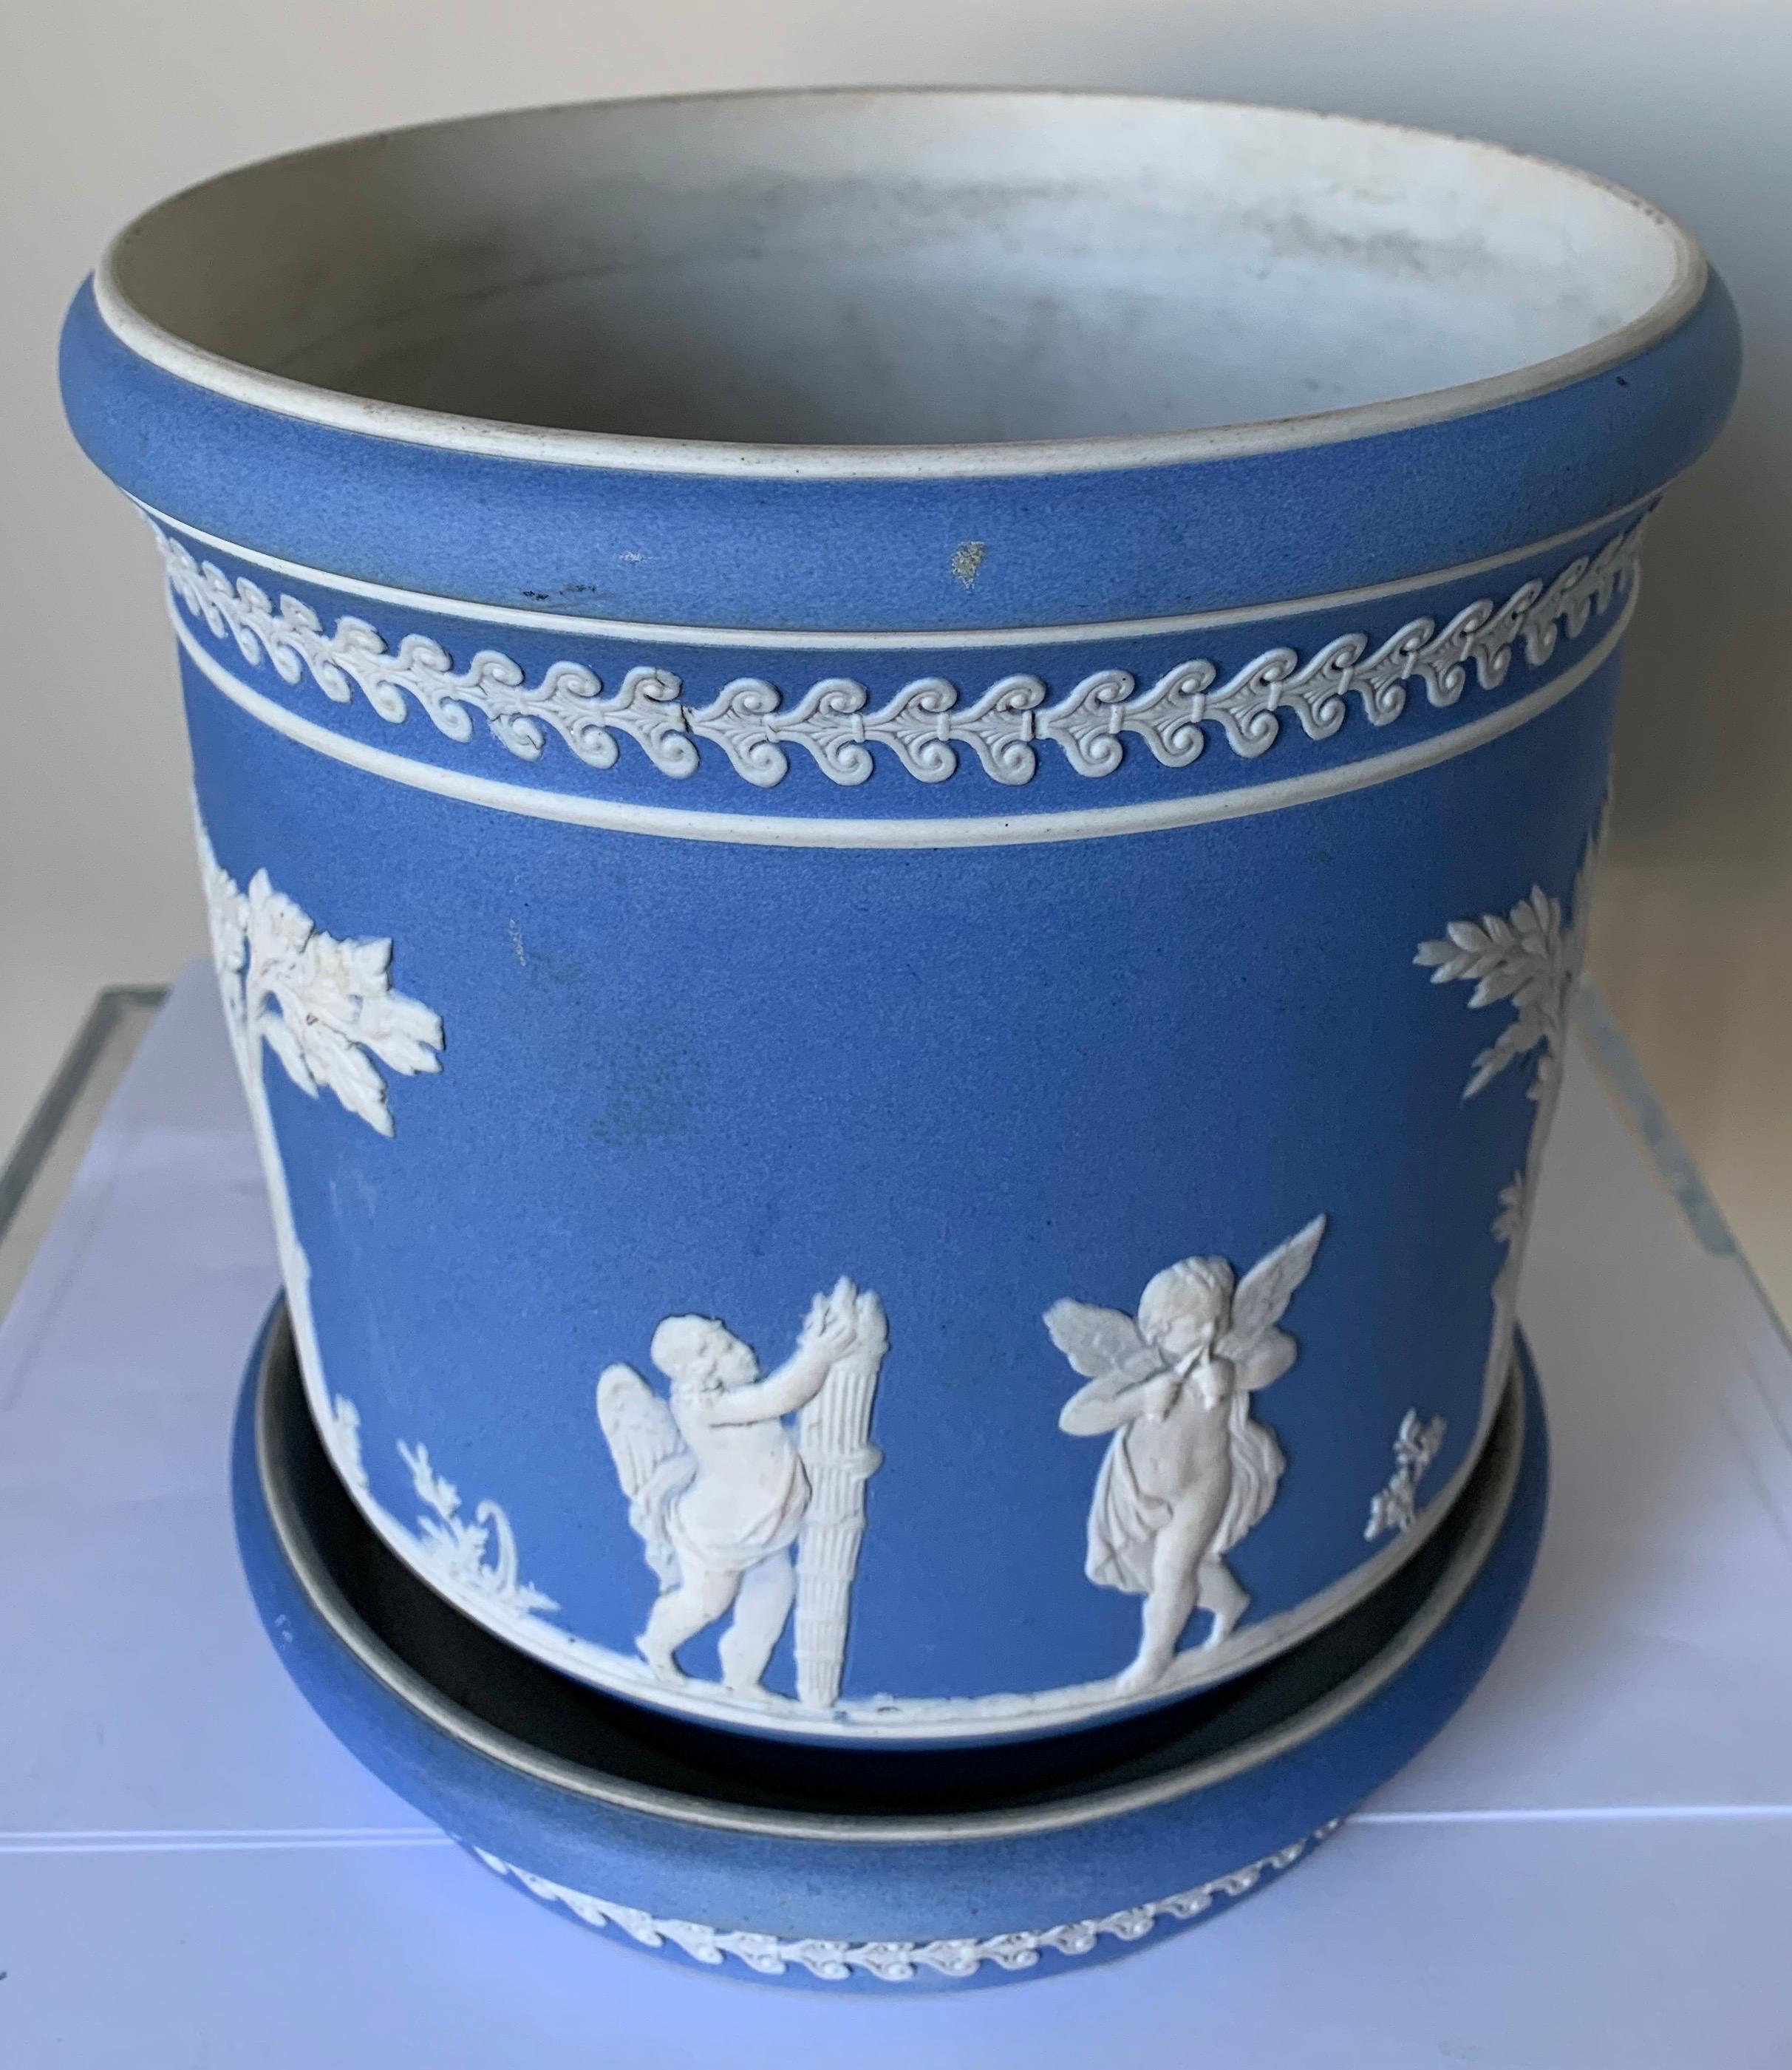 Dudson light blue and white jasperware pot on stand. Medium blue Jasperware with all over neoclassical motif.
Marked C on the underside. Pot has a center hole that has been filled in.
Underplate measures 1.5” tall x 7.5” wide. Pot measures 7.25”